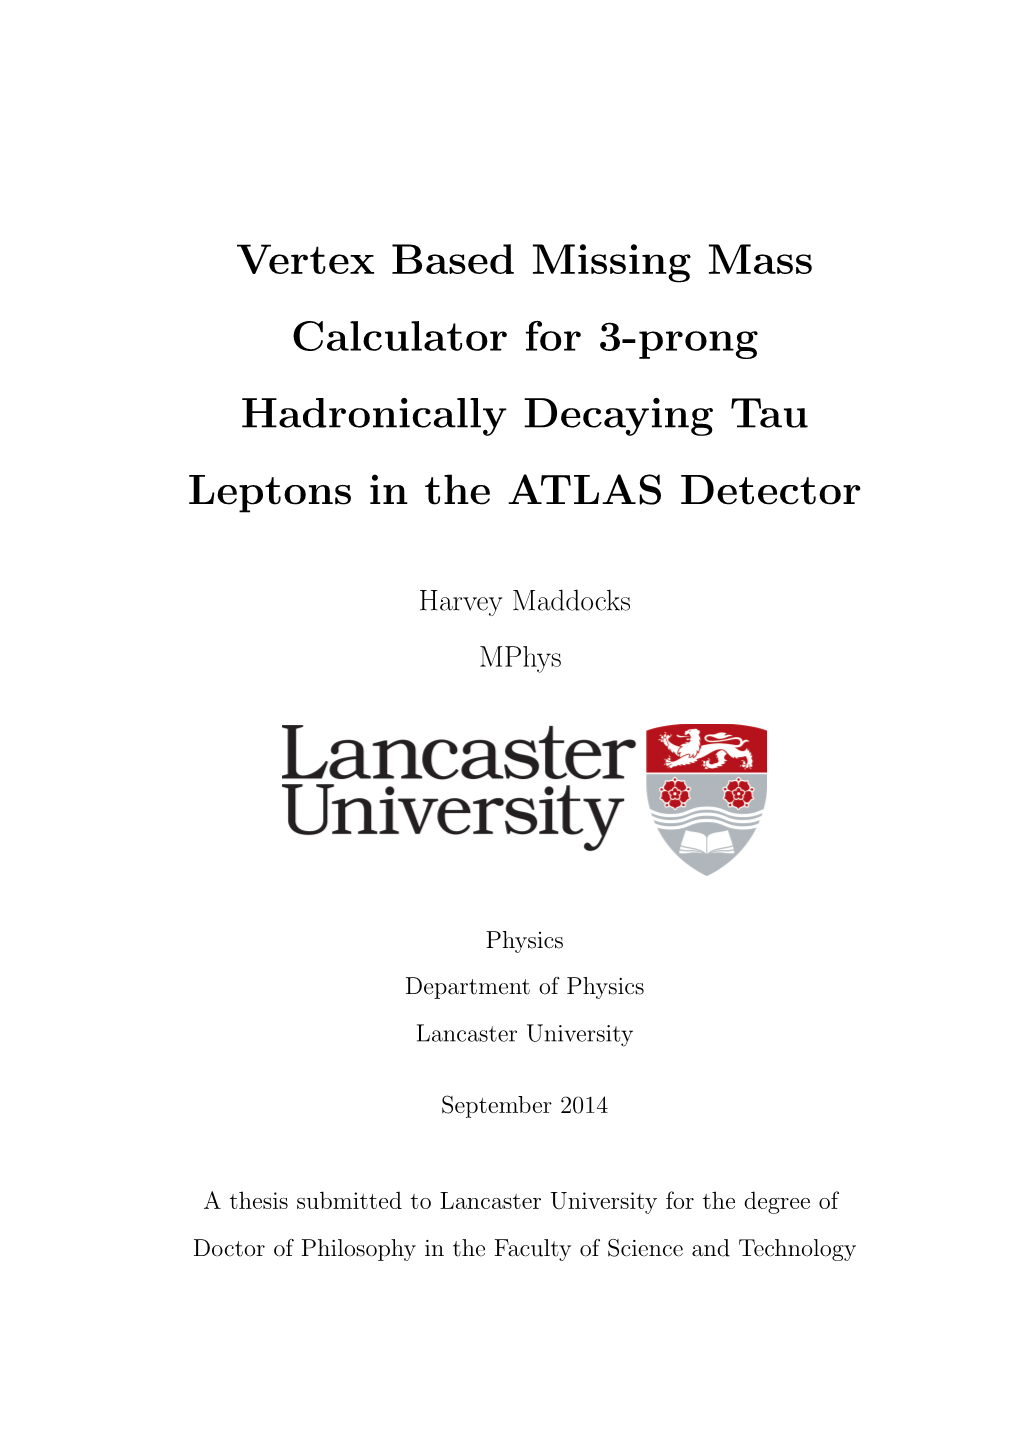 Vertex Based Missing Mass Calculator for 3-Prong Hadronically Decaying Tau Leptons in the ATLAS Detector